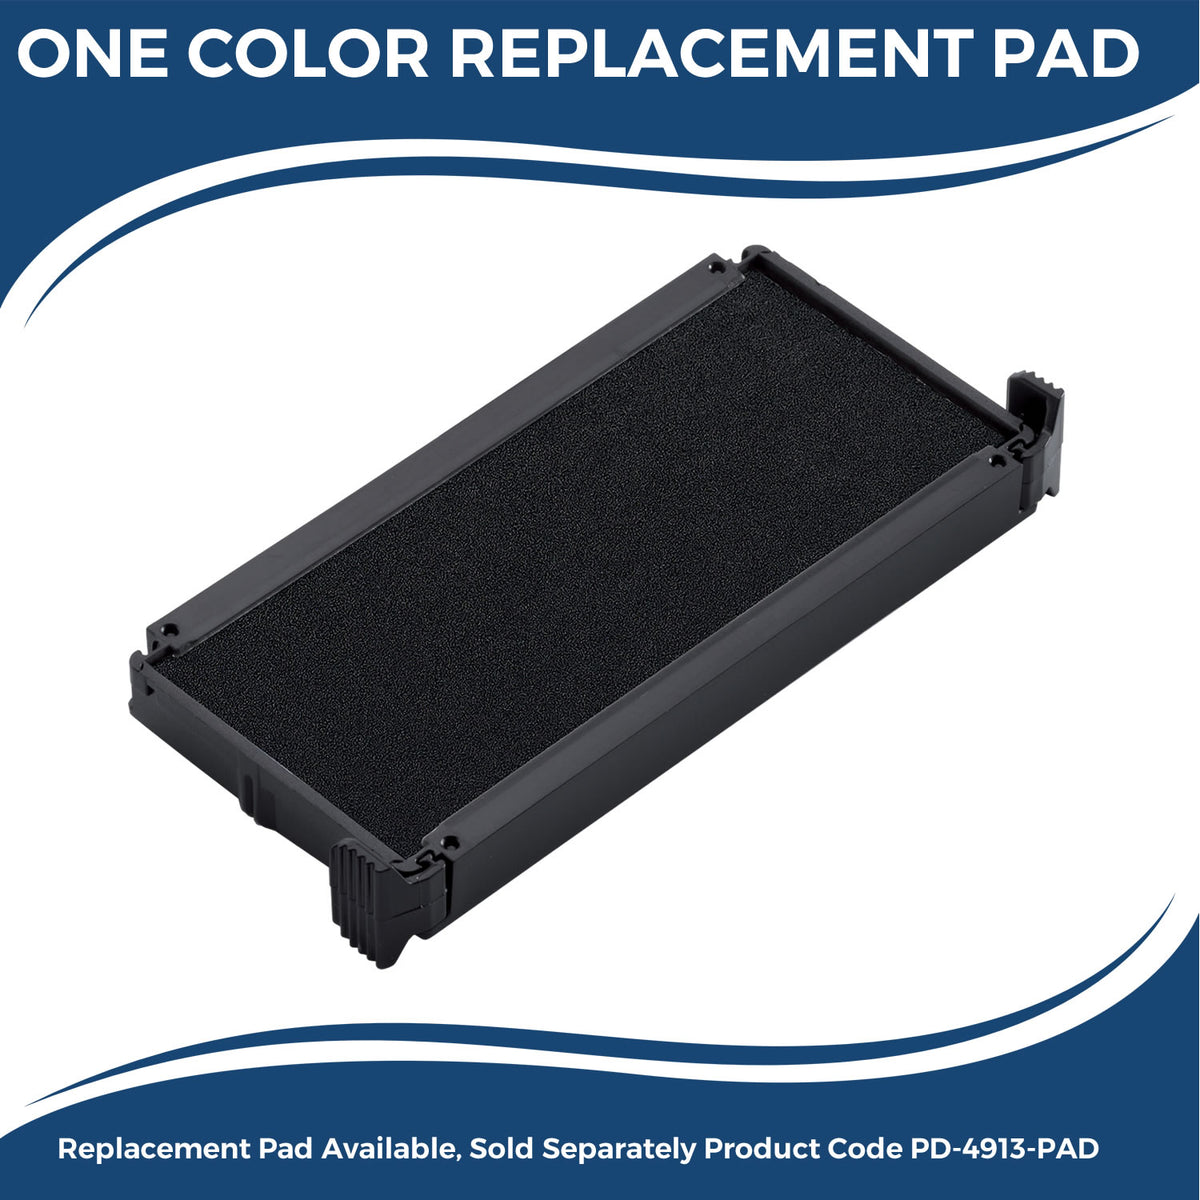 Large Self Inking Distributed Stamp 4118S Large Replacment Pad